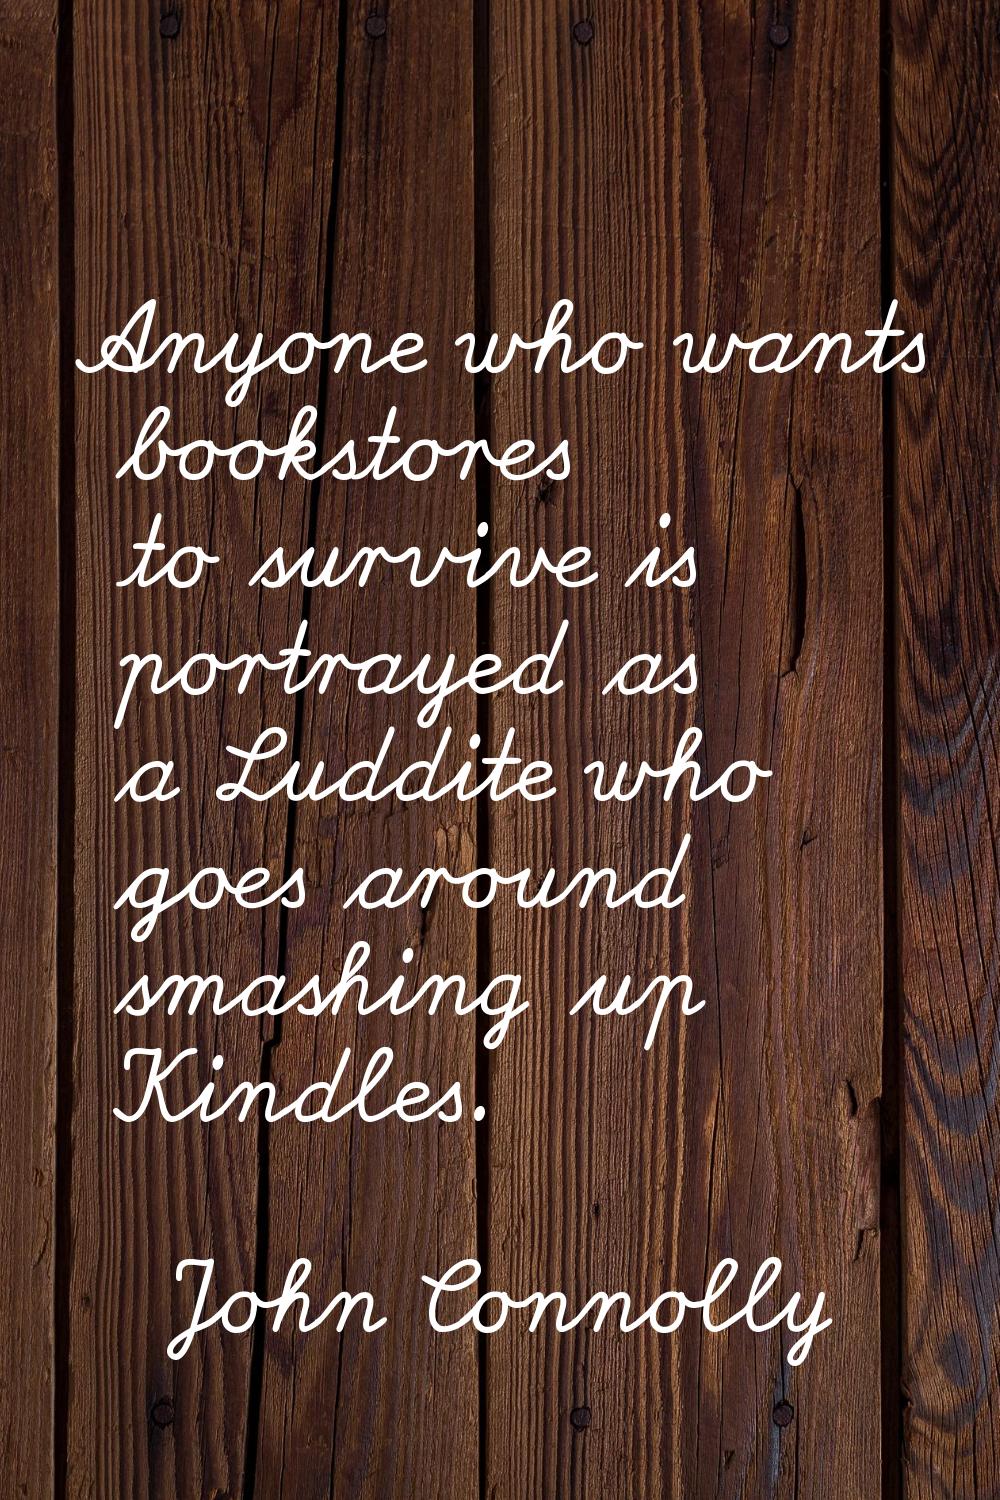 Anyone who wants bookstores to survive is portrayed as a Luddite who goes around smashing up Kindle